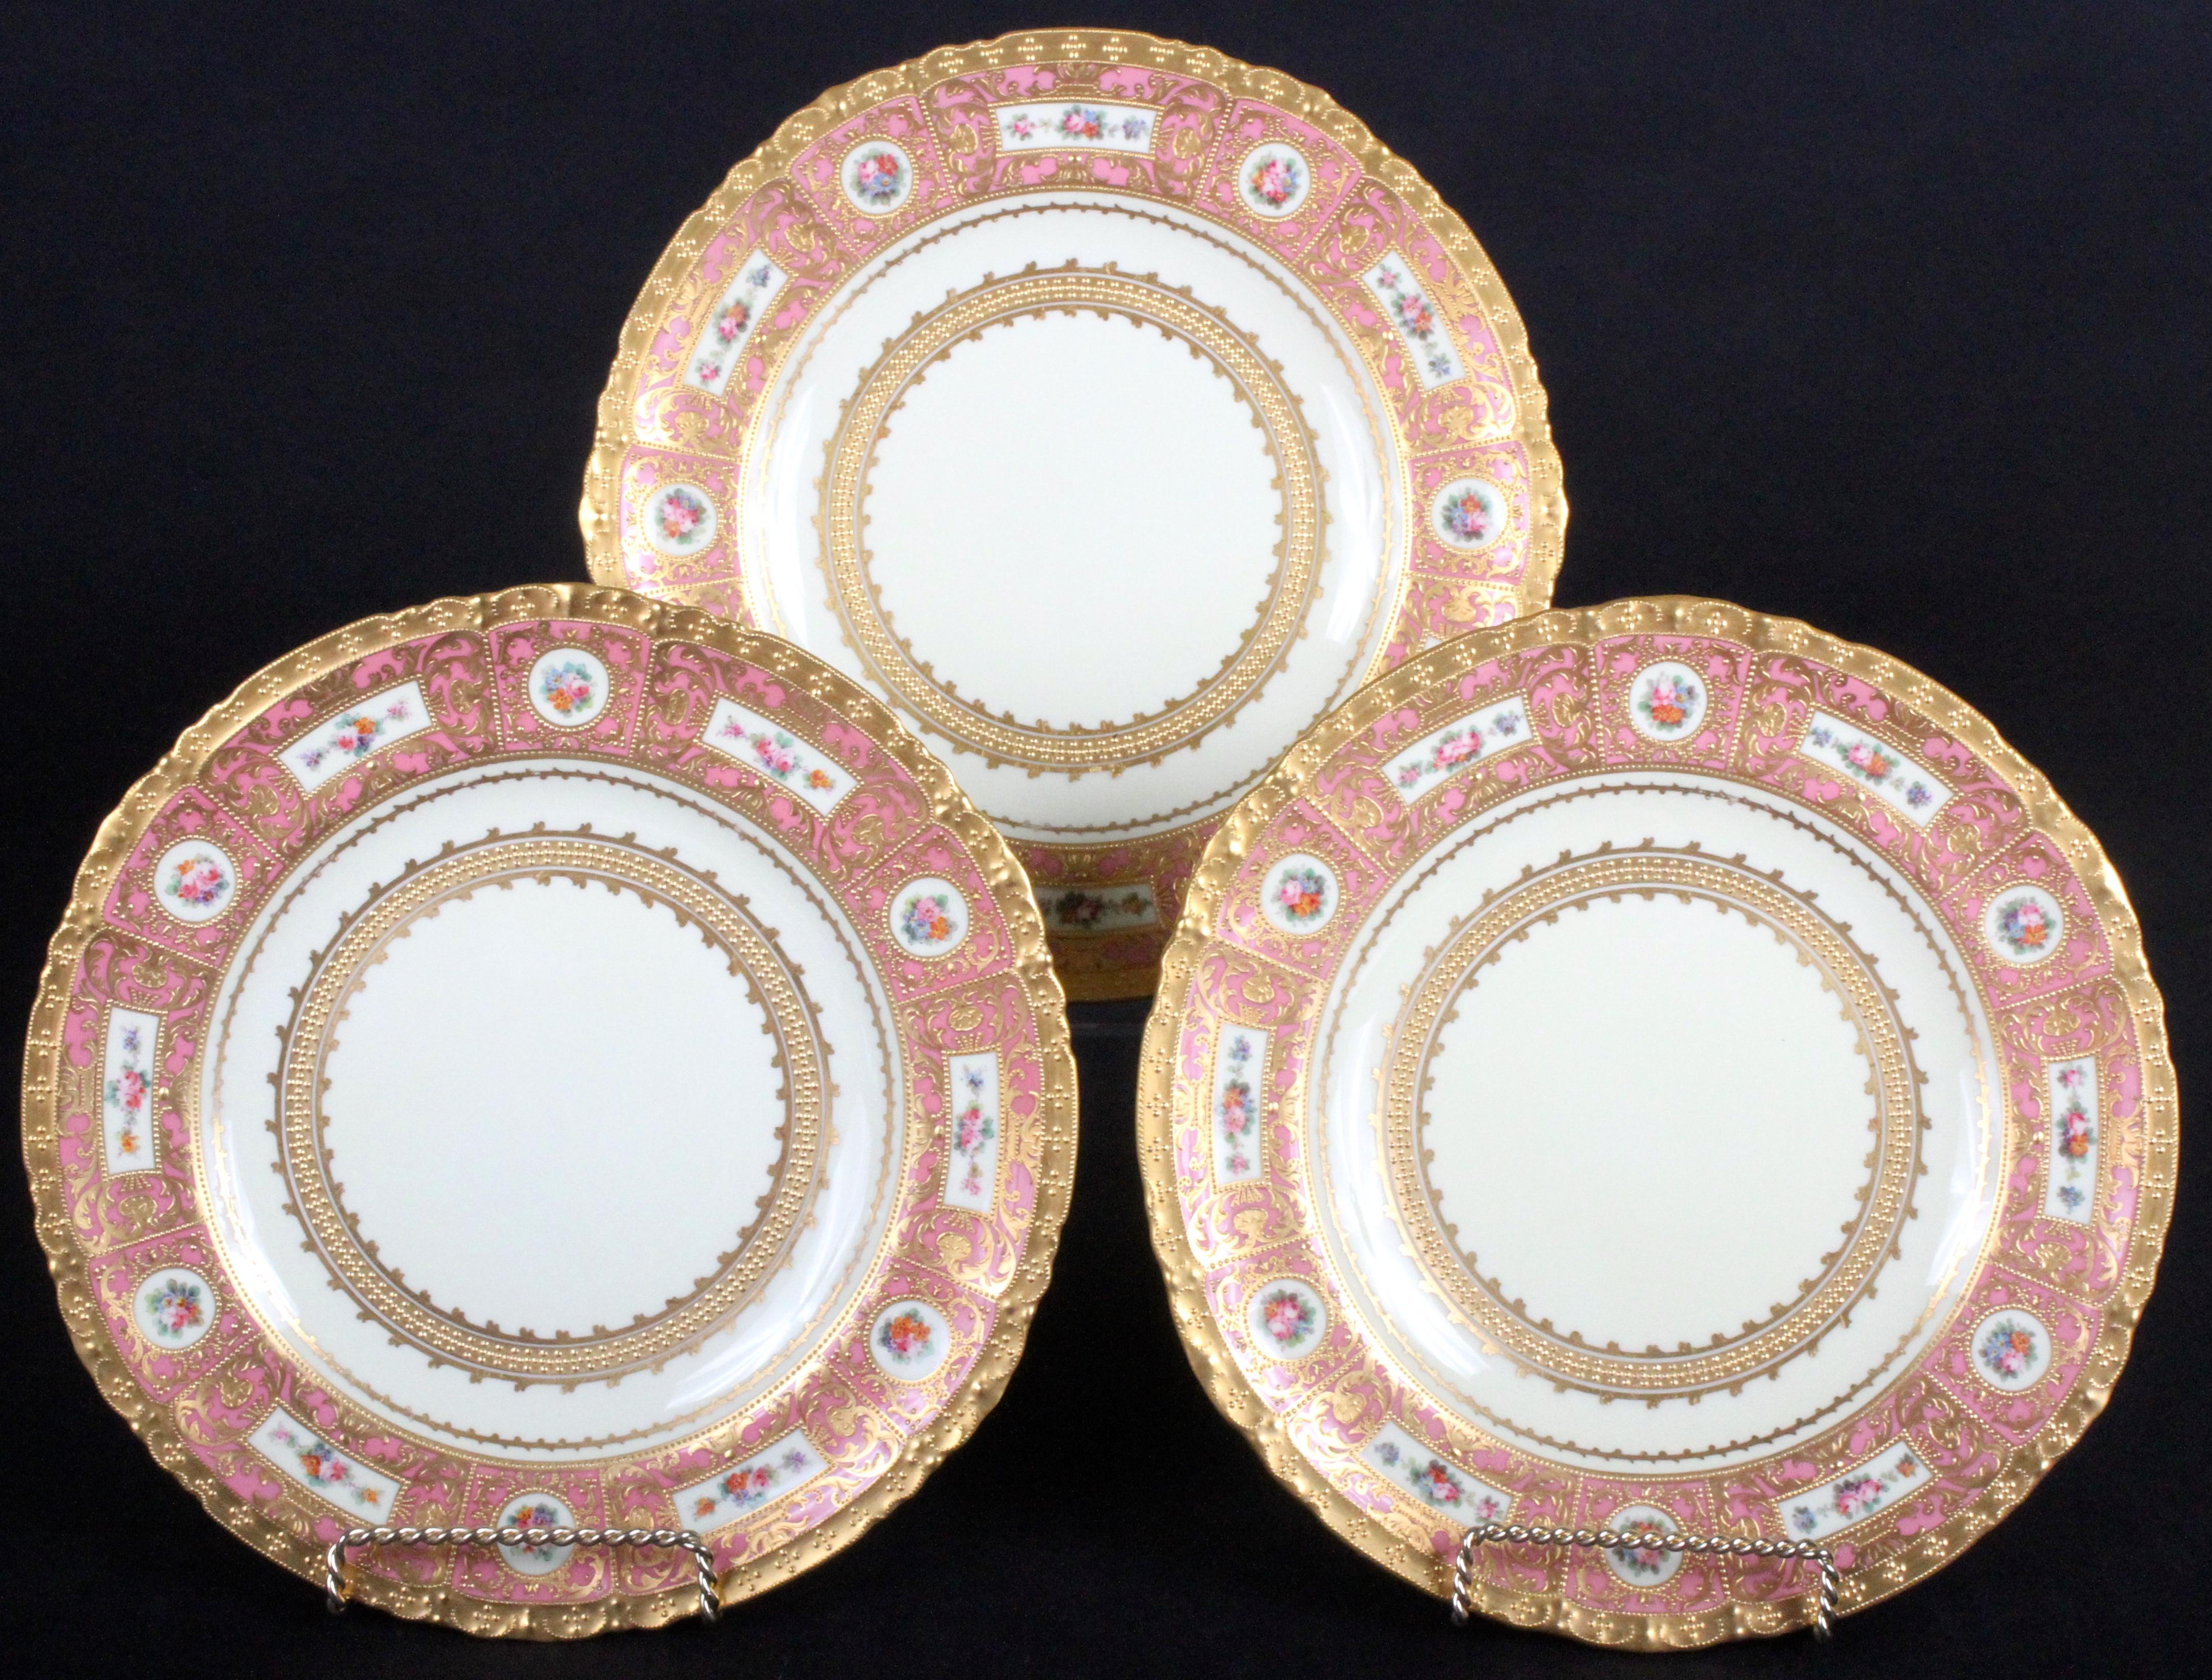 These 11 ornate service or dinner plates are from the esteemed Royal Crown Derby firm of Derby, England. The plate rim is divided into 6 rectangular panels that feature hand painted groups of flowers, the rectangular panels are separated by 6